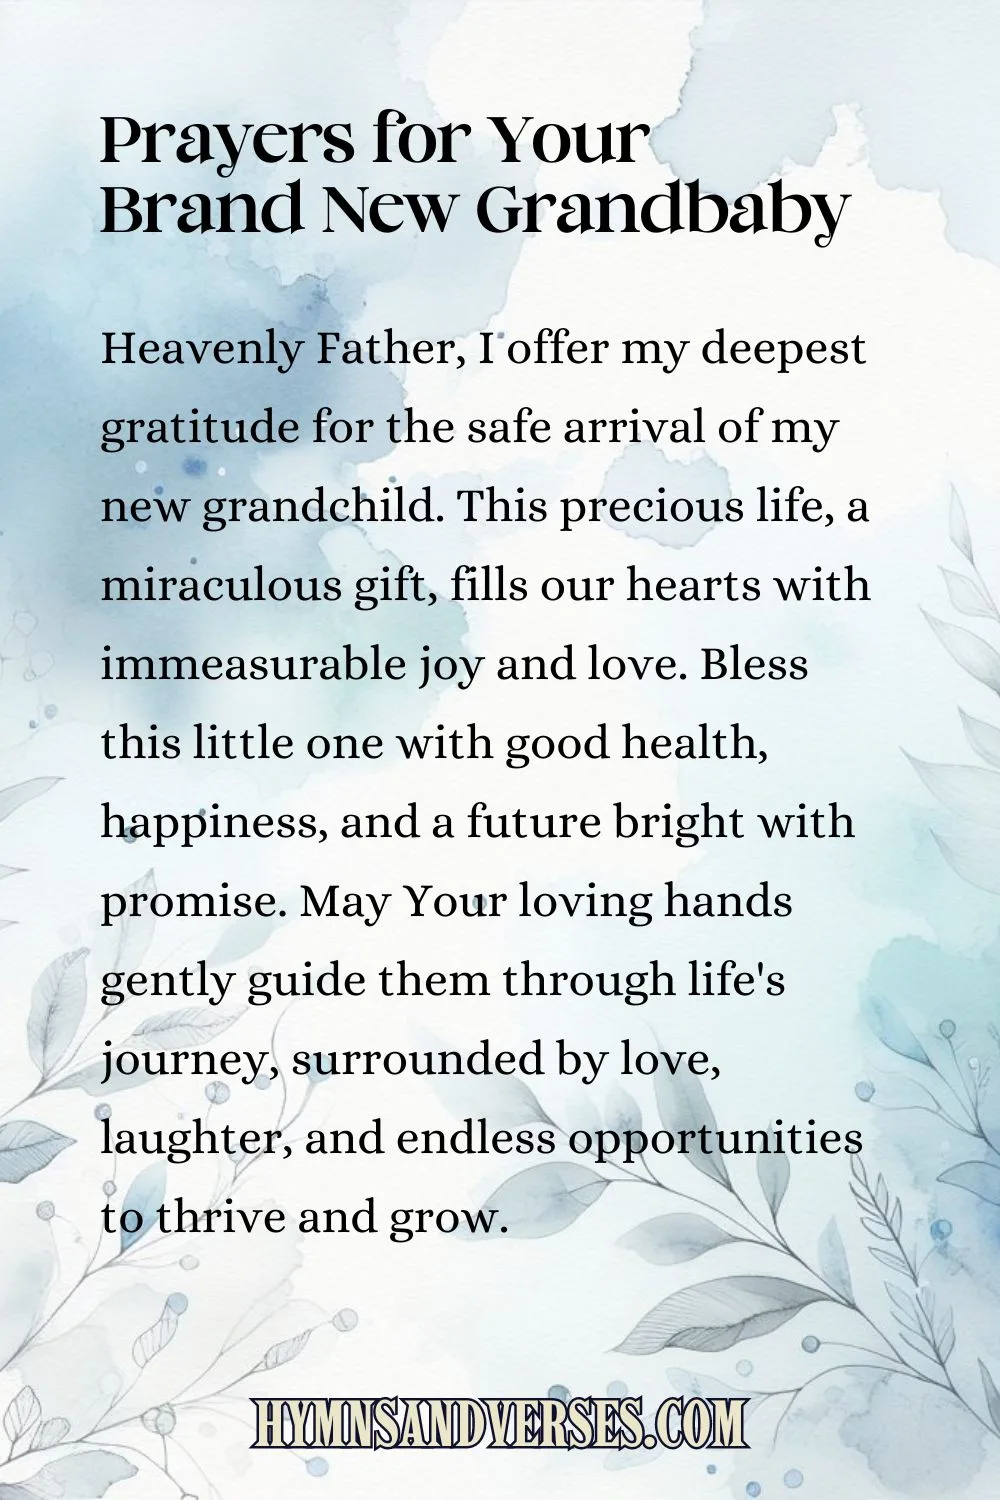 Pin sized image for prayers for your new grandbaby, reads: Heavenly Father, I offer my deepest gratitude for the safe arrival of my new grandchild. This precious life, a miraculous gift, fills our hearts with immeasurable joy and love. Bless this little one with good health, happiness, and a future bright with promise. May Your loving hands gently guide them through life's journey, surrounded by love, laughter, and endless opportunities to thrive and grow.